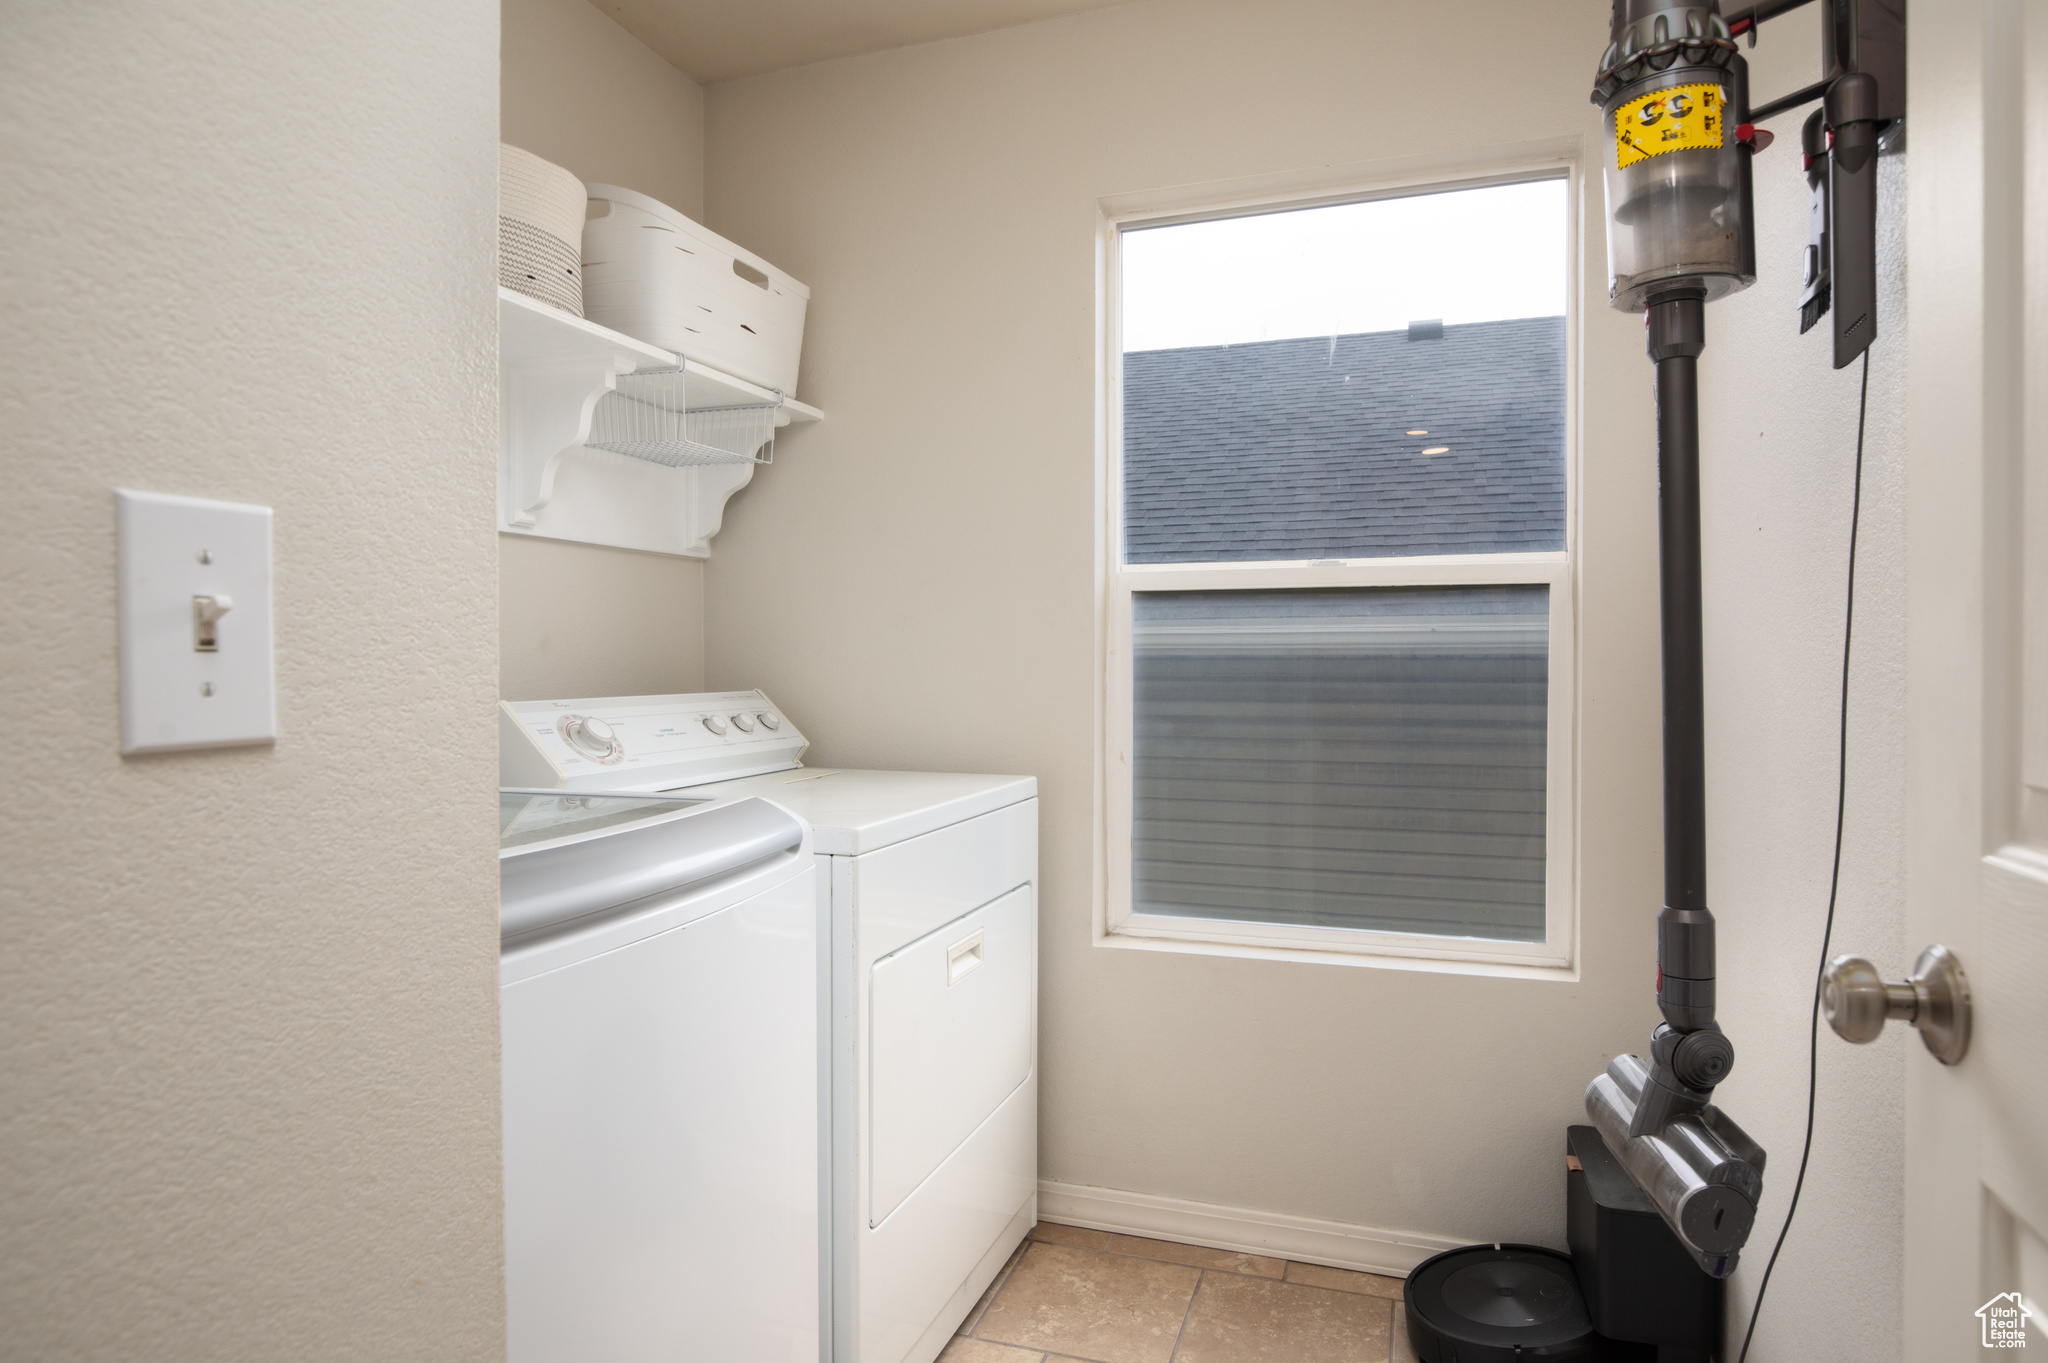 Laundry area with light tile flooring and washer and dryer